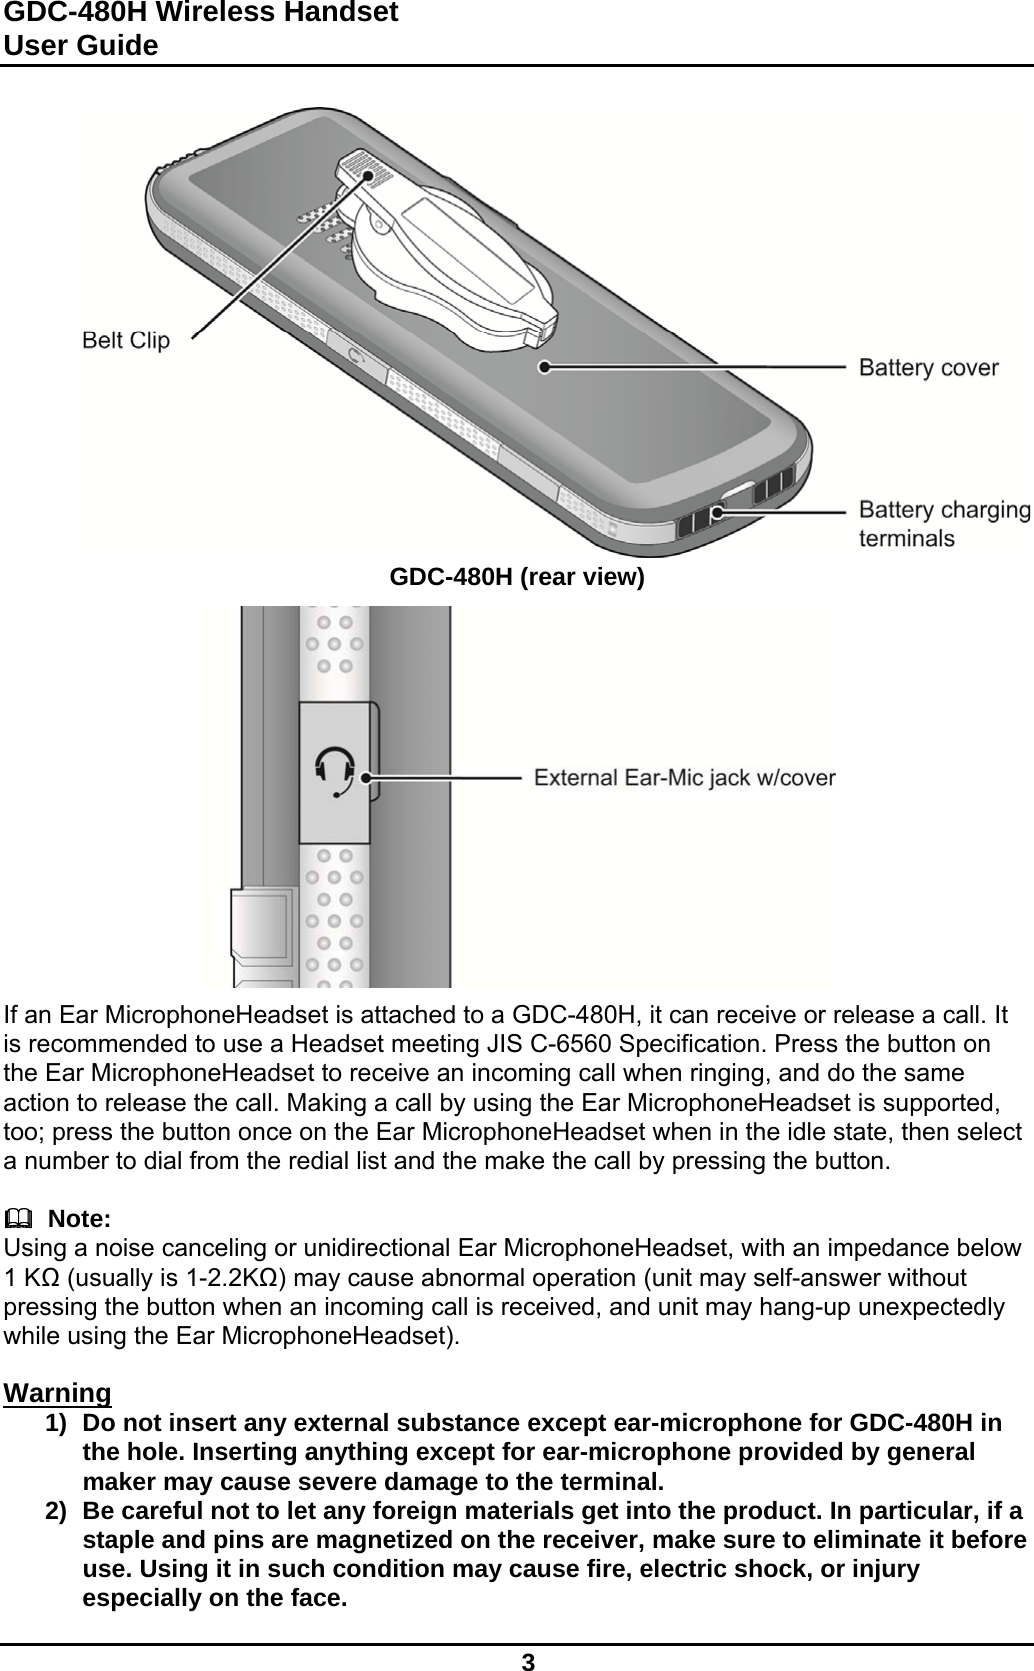 GDC-480H Wireless Handset User Guide   3                  GDC-480H (rear view)               If an Ear MicrophoneHeadset is attached to a GDC-480H, it can receive or release a call. It is recommended to use a Headset meeting JIS C-6560 Specification. Press the button on the Ear MicrophoneHeadset to receive an incoming call when ringing, and do the same action to release the call. Making a call by using the Ear MicrophoneHeadset is supported, too; press the button once on the Ear MicrophoneHeadset when in the idle state, then select a number to dial from the redial list and the make the call by pressing the button.    Note: Using a noise canceling or unidirectional Ear MicrophoneHeadset, with an impedance below 1 KΩ (usually is 1-2.2KΩ) may cause abnormal operation (unit may self-answer without pressing the button when an incoming call is received, and unit may hang-up unexpectedly while using the Ear MicrophoneHeadset).  Warning  1)  Do not insert any external substance except ear-microphone for GDC-480H in the hole. Inserting anything except for ear-microphone provided by general maker may cause severe damage to the terminal. 2)  Be careful not to let any foreign materials get into the product. In particular, if a staple and pins are magnetized on the receiver, make sure to eliminate it before use. Using it in such condition may cause fire, electric shock, or injury especially on the face.   